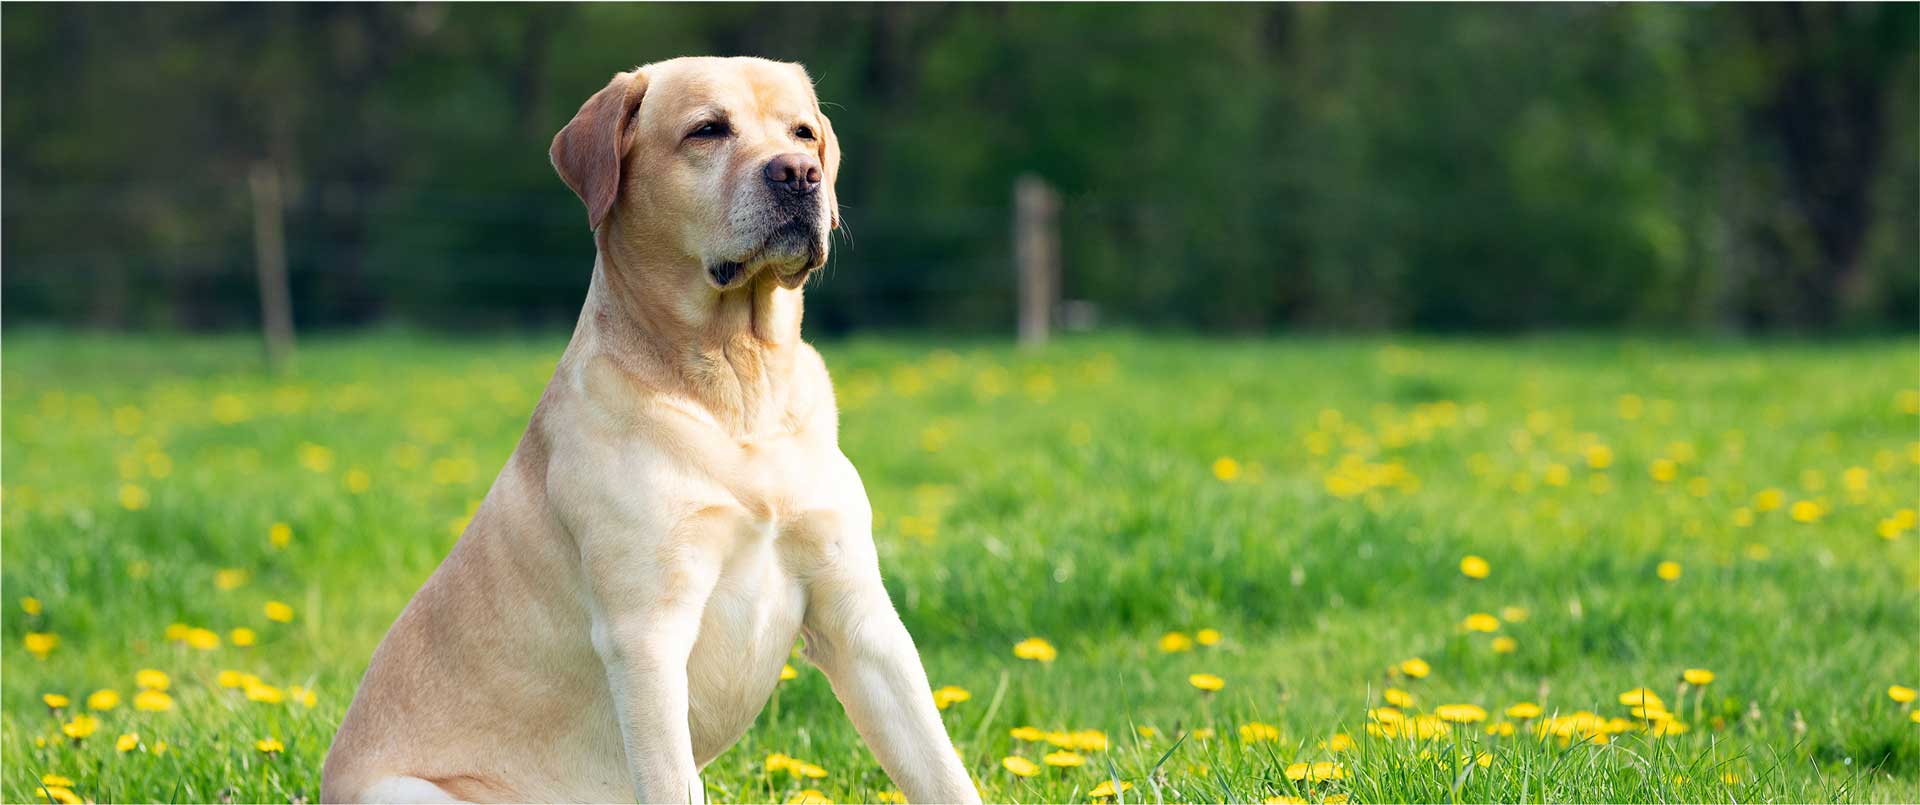 Adult White Lab Sitting In Field